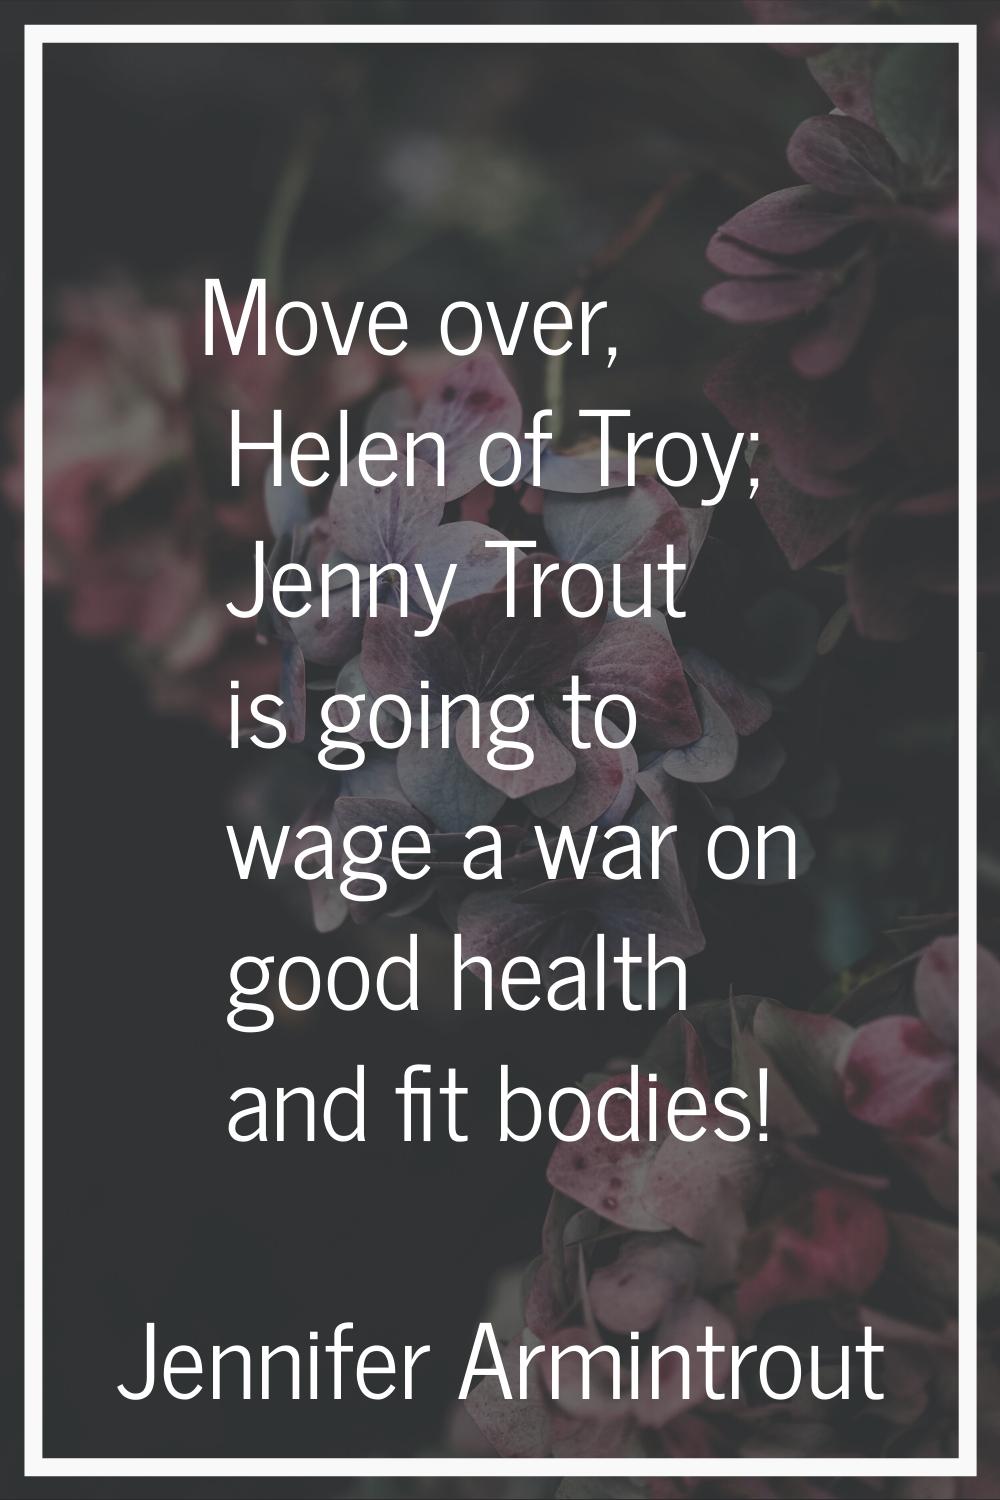 Move over, Helen of Troy; Jenny Trout is going to wage a war on good health and fit bodies!